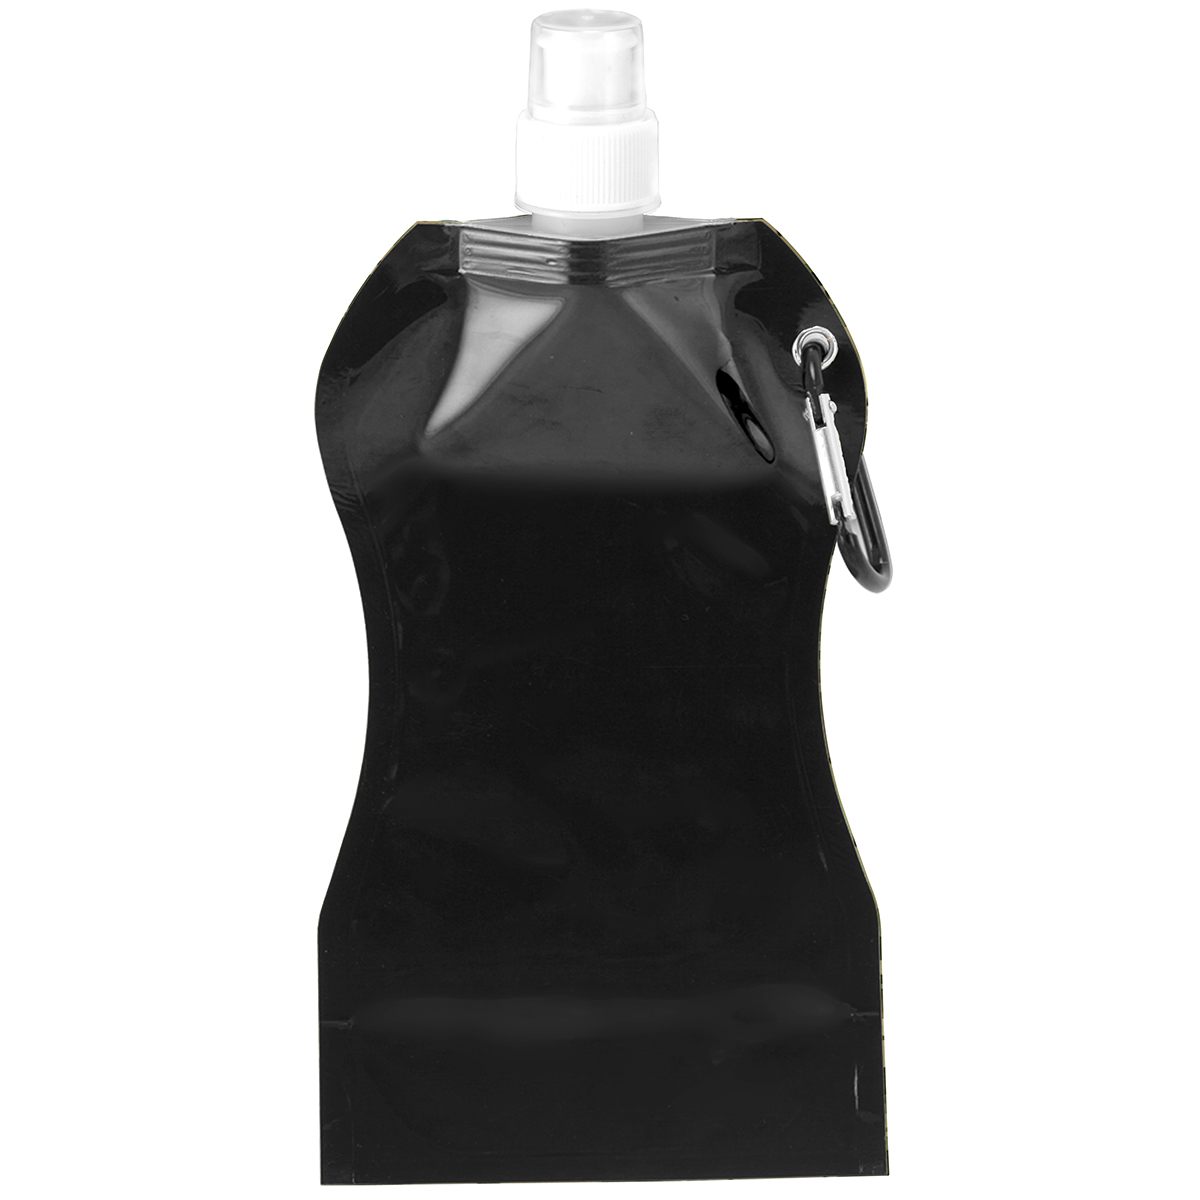 Black Wave Collapsible Water Bottle (16.9 oz)